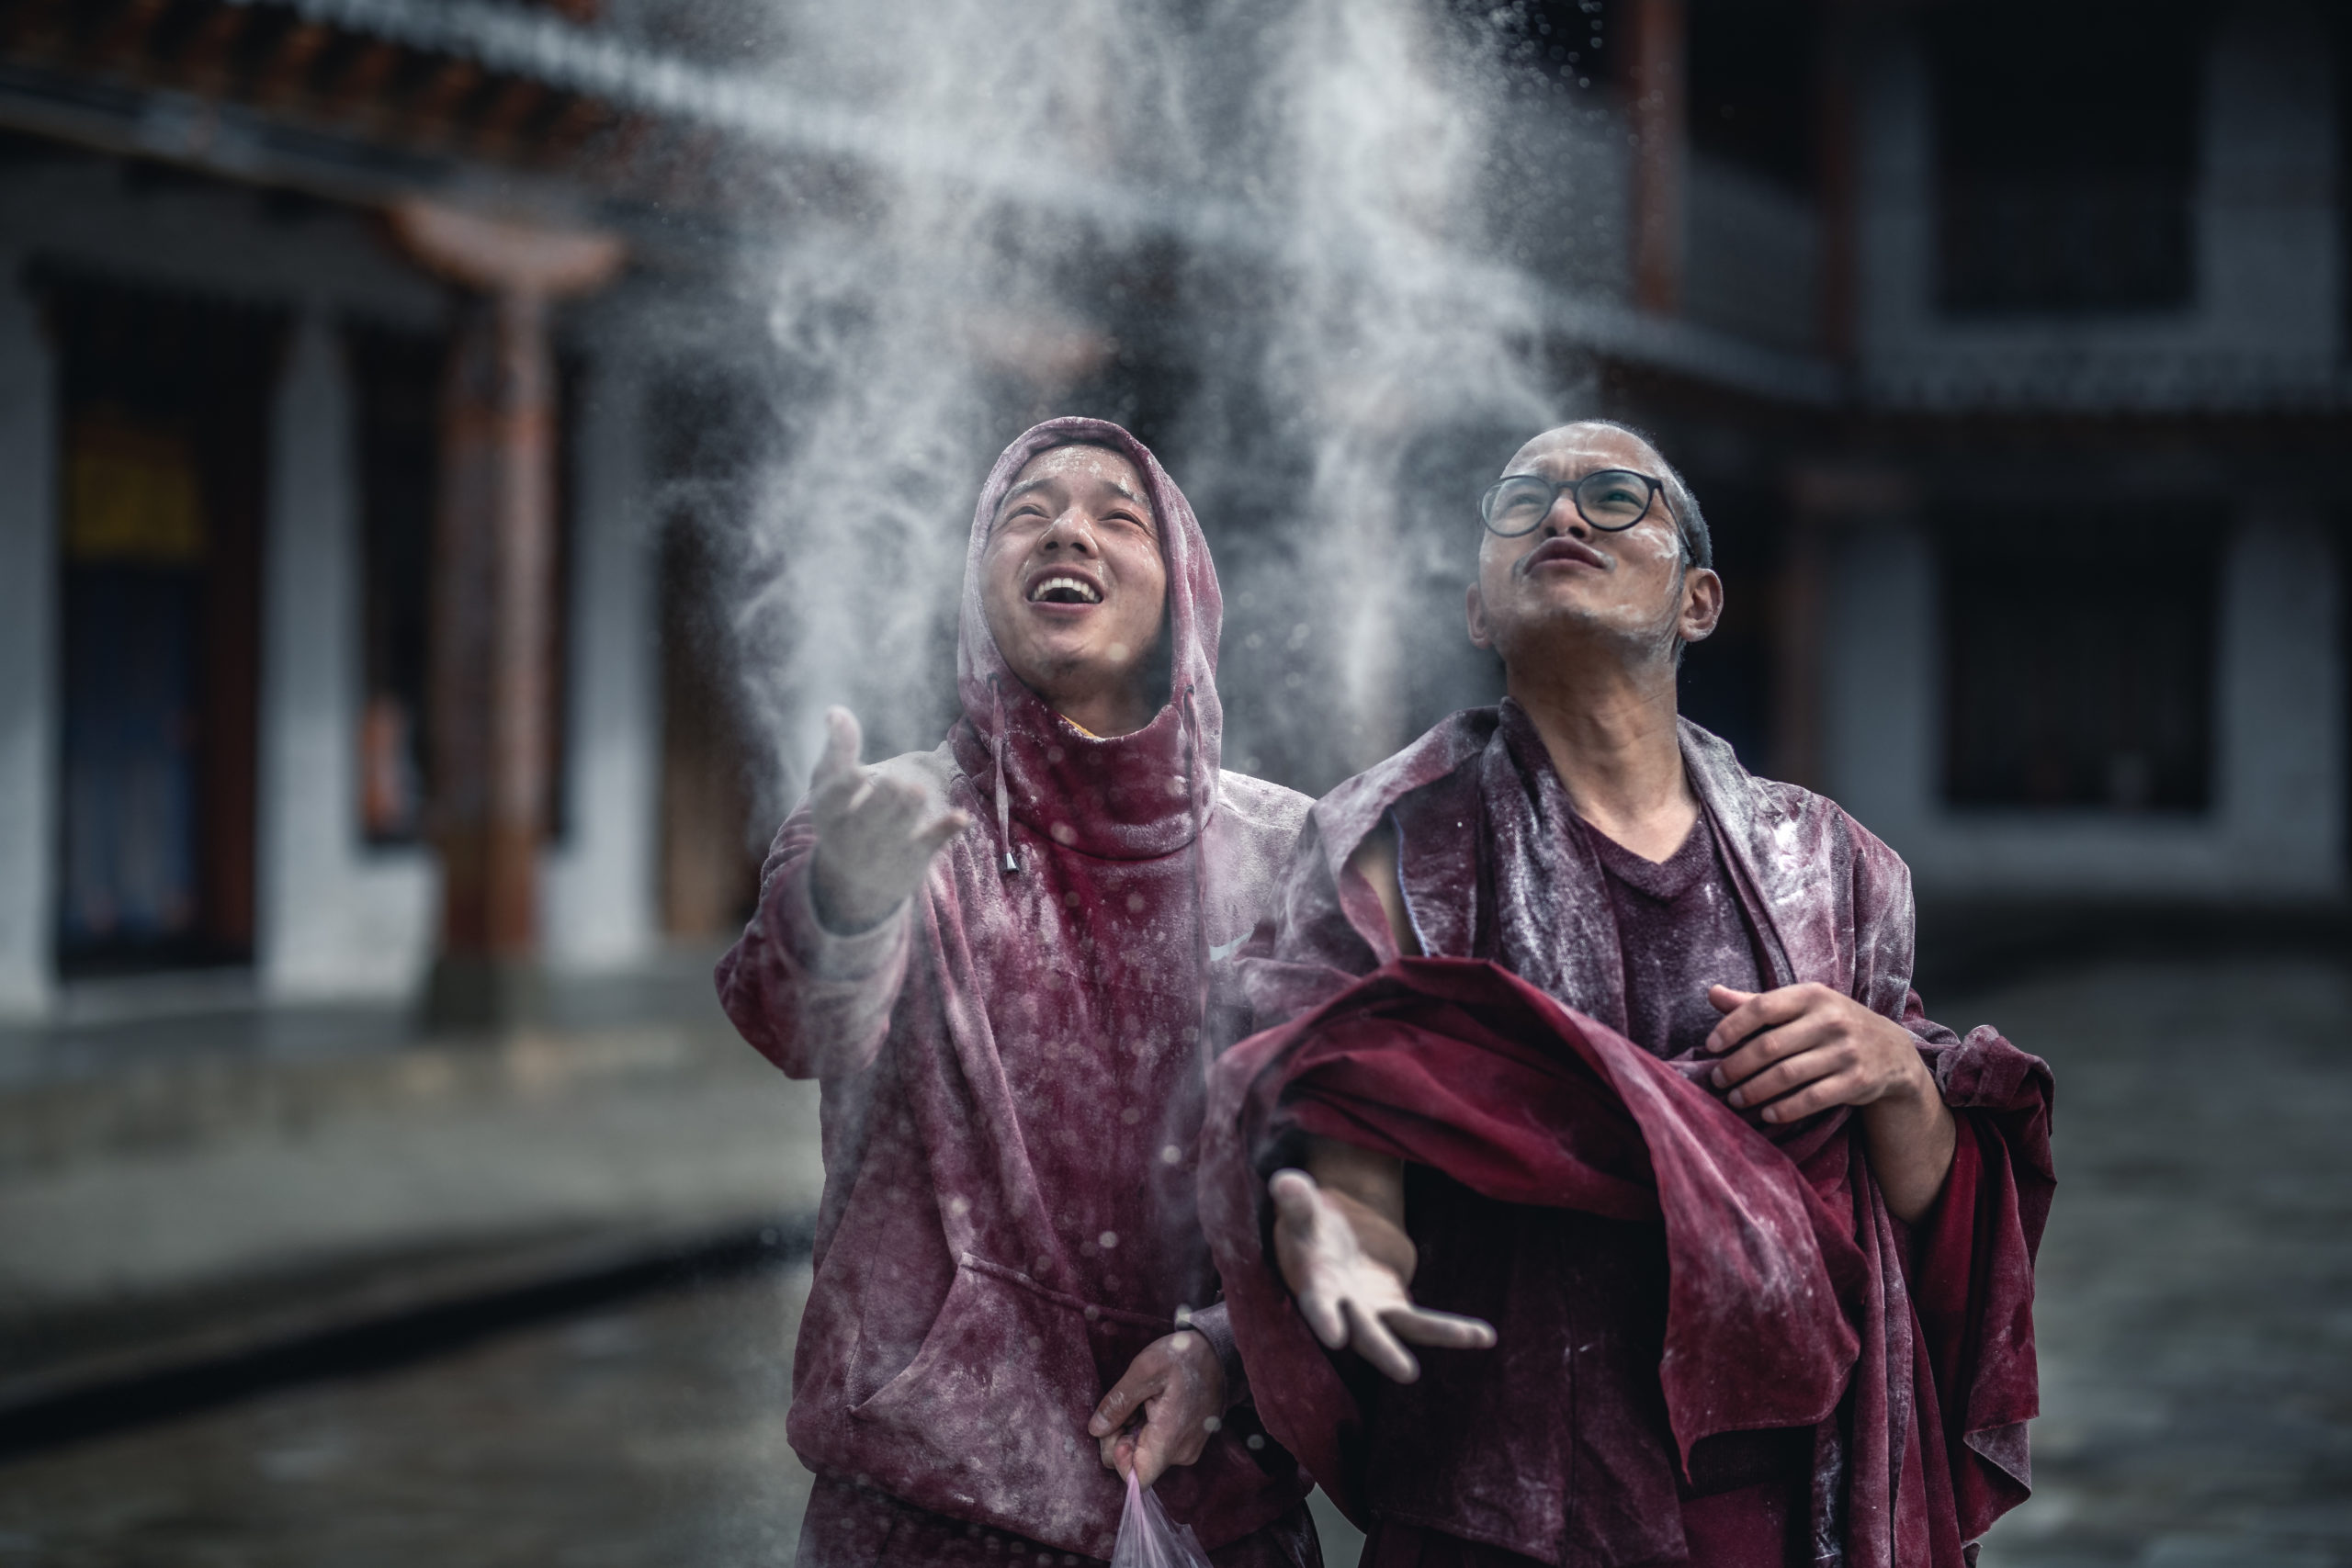 Portrait photography of two Buddhist monks throwing flour into the air during the Losar Celebration in Bhutan